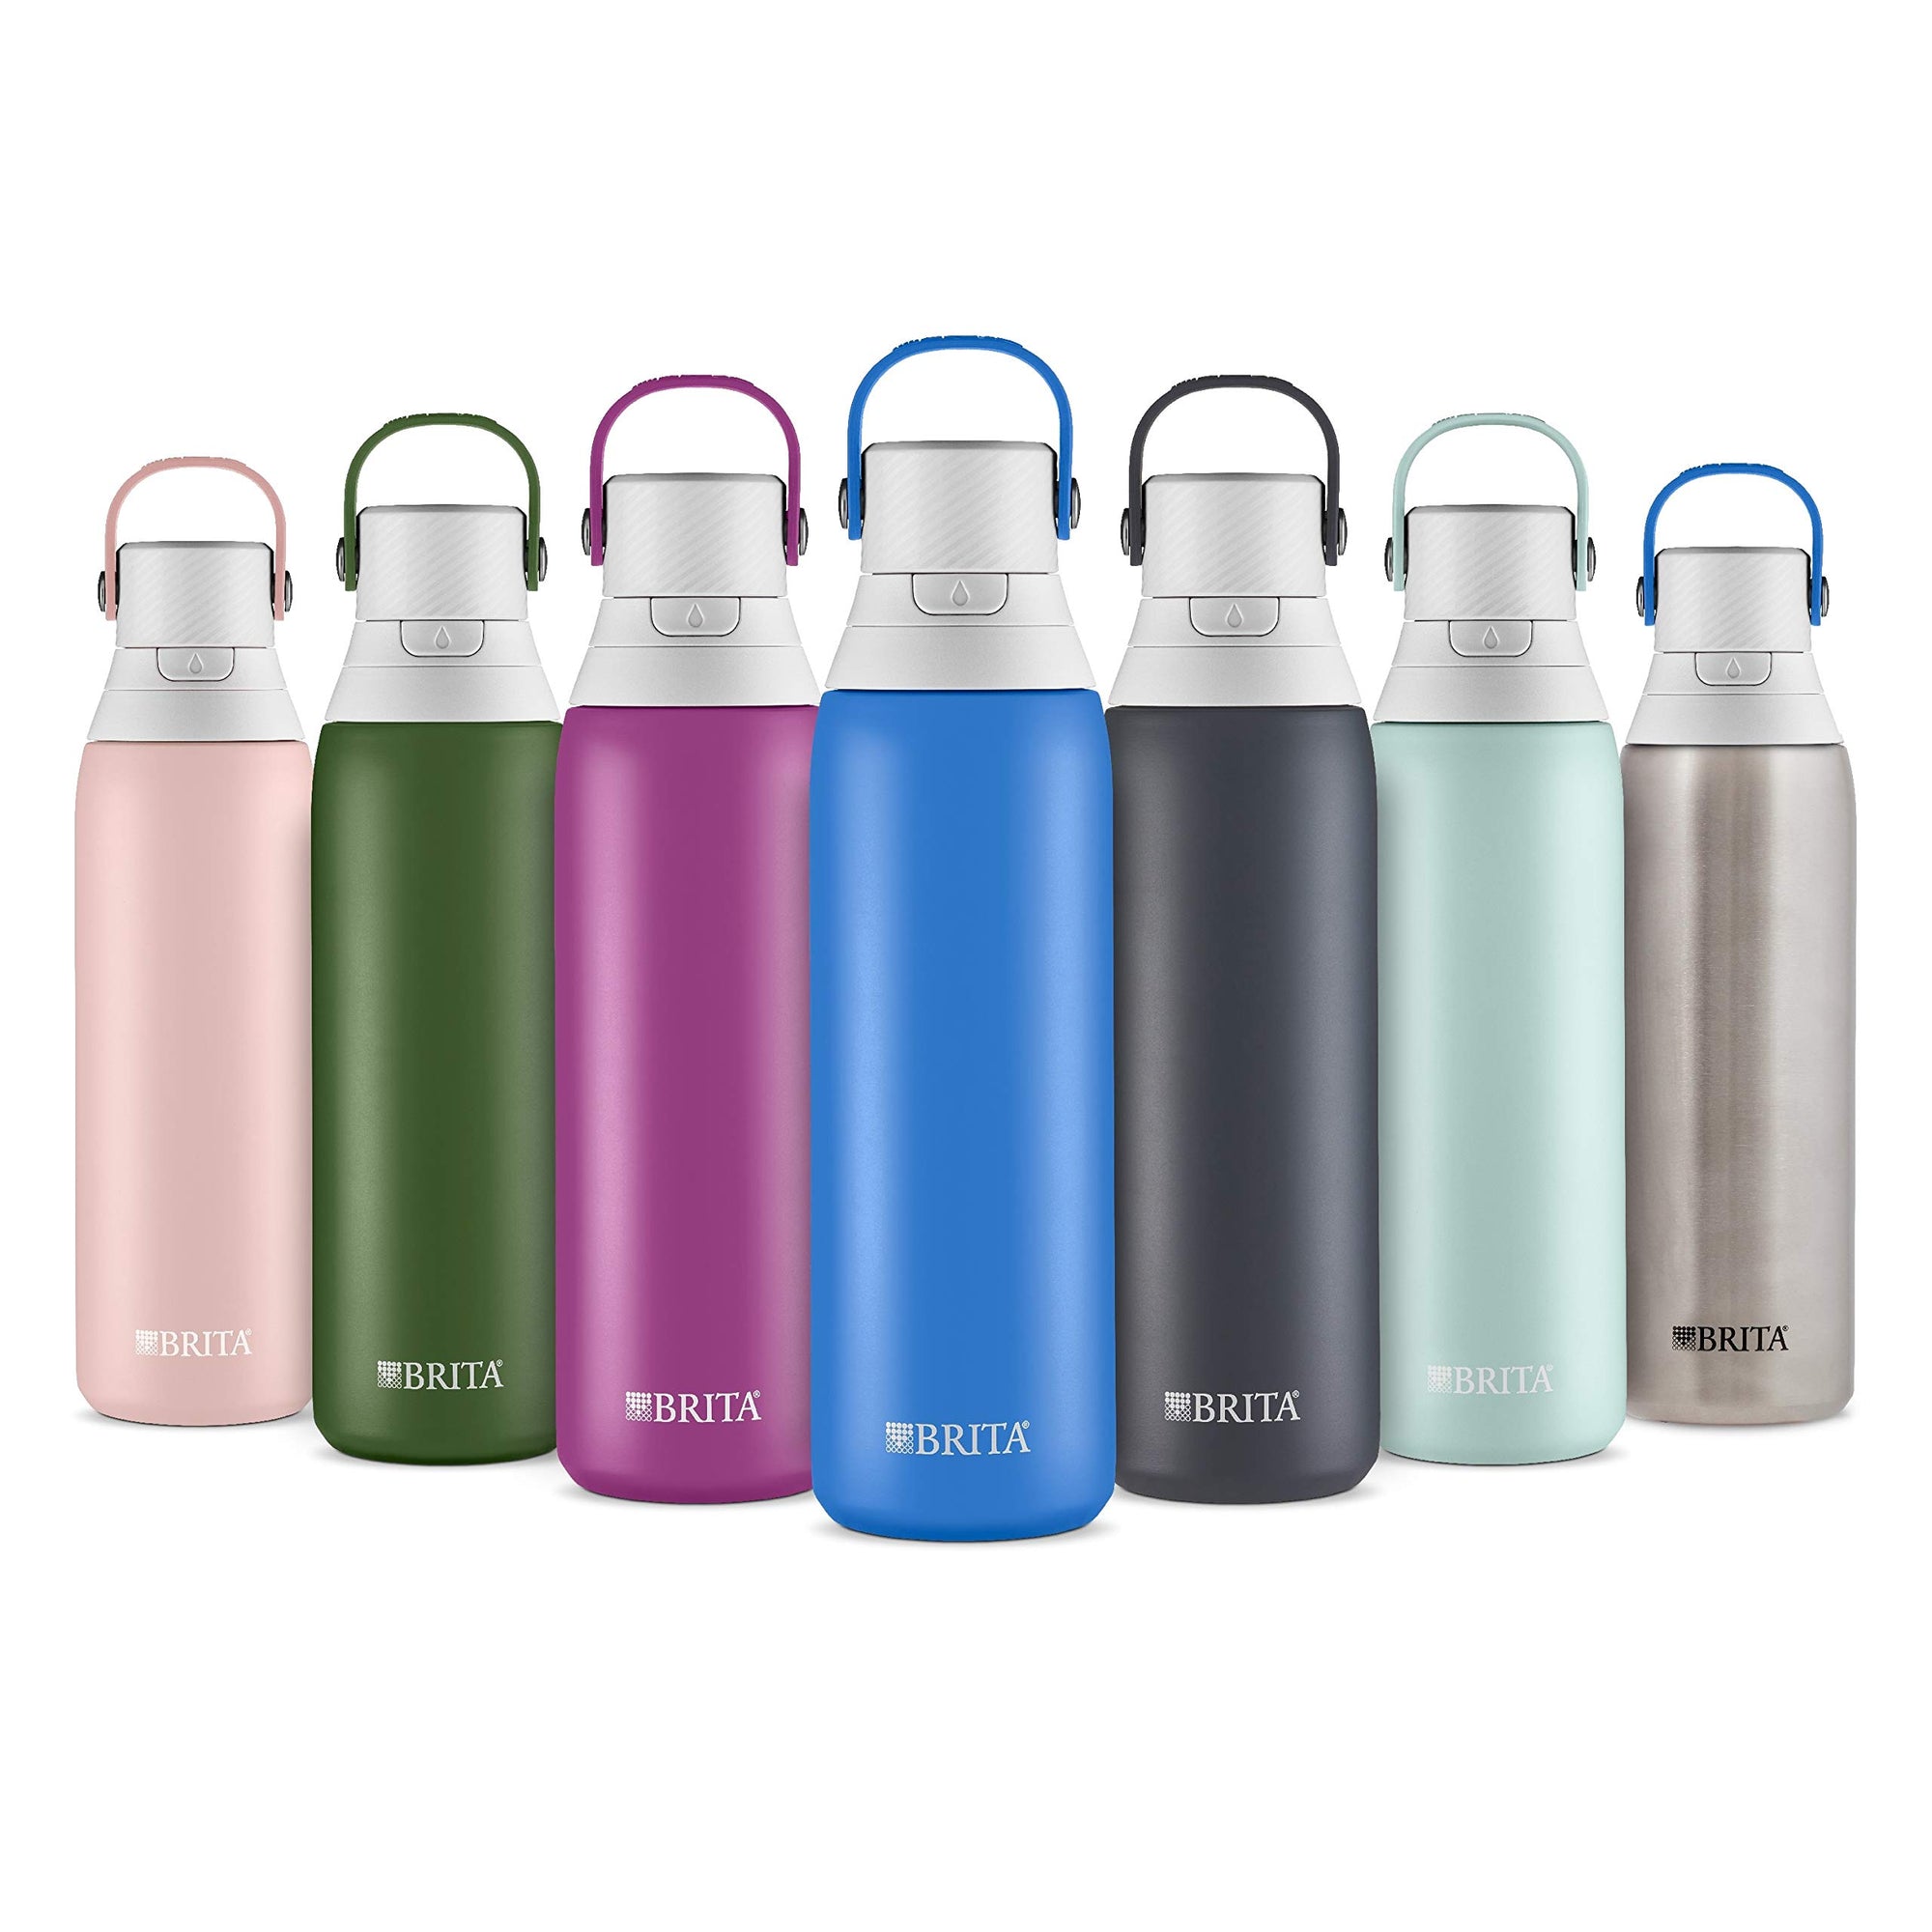 Brita 20 Ounce Premium Filtering Water Bottle with Filter BPA Free - Stainless Steel